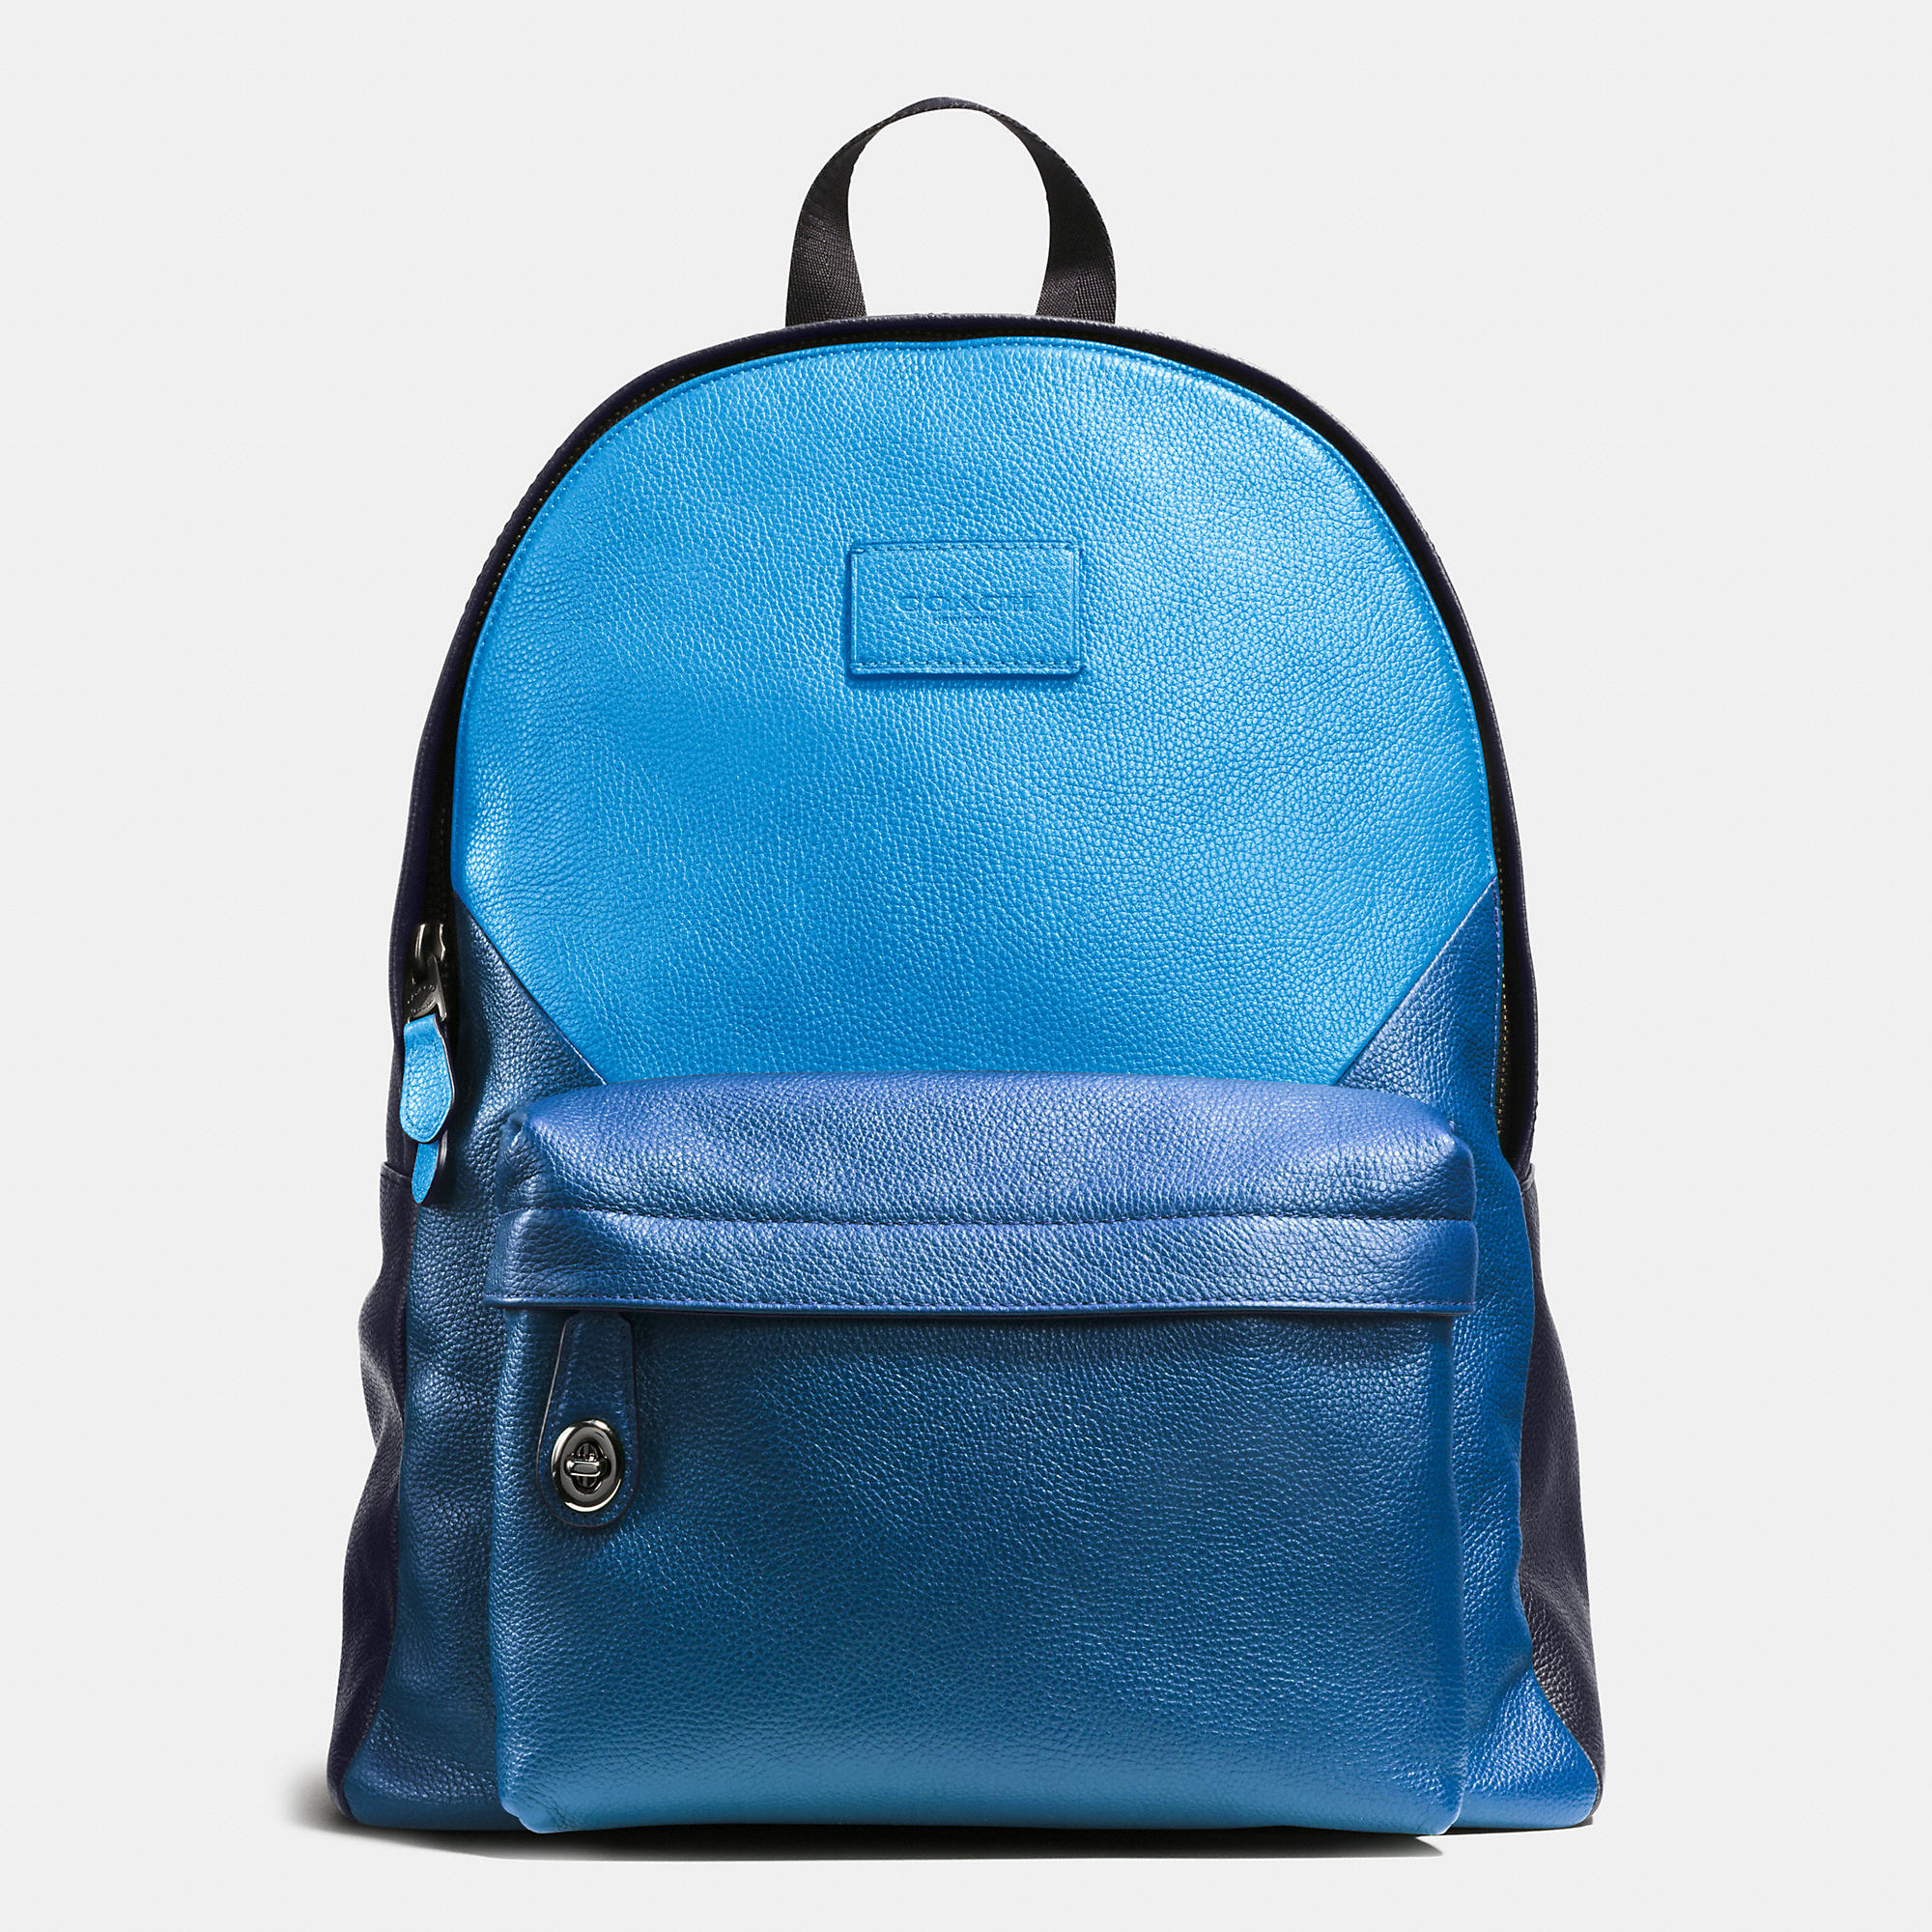 Coach Campus Backpack In Patchwork Pebble Leather in Blue for Men